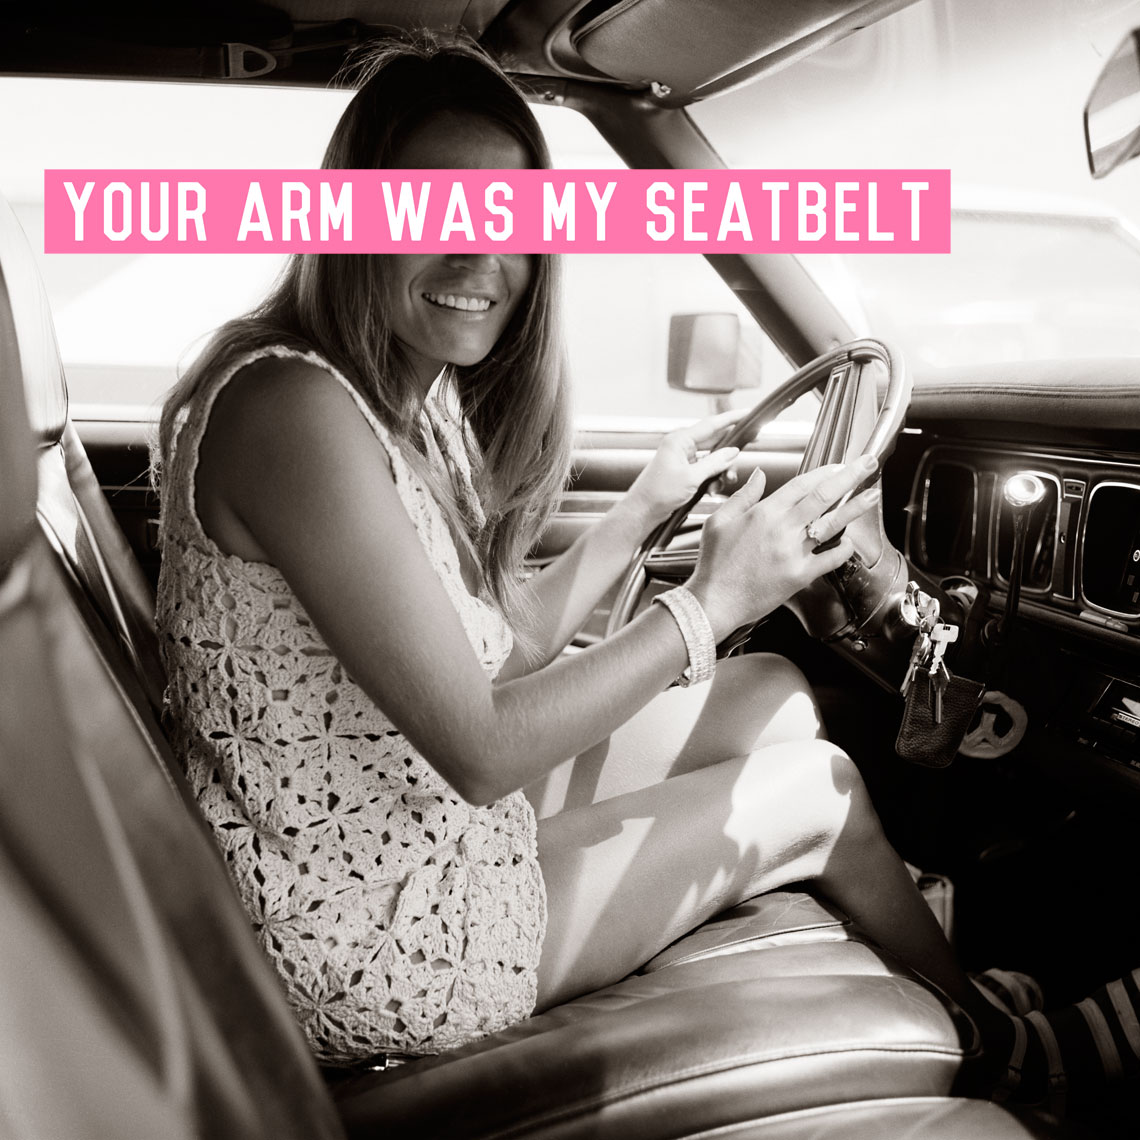 Your Arm Was My Seatbelt, 2017